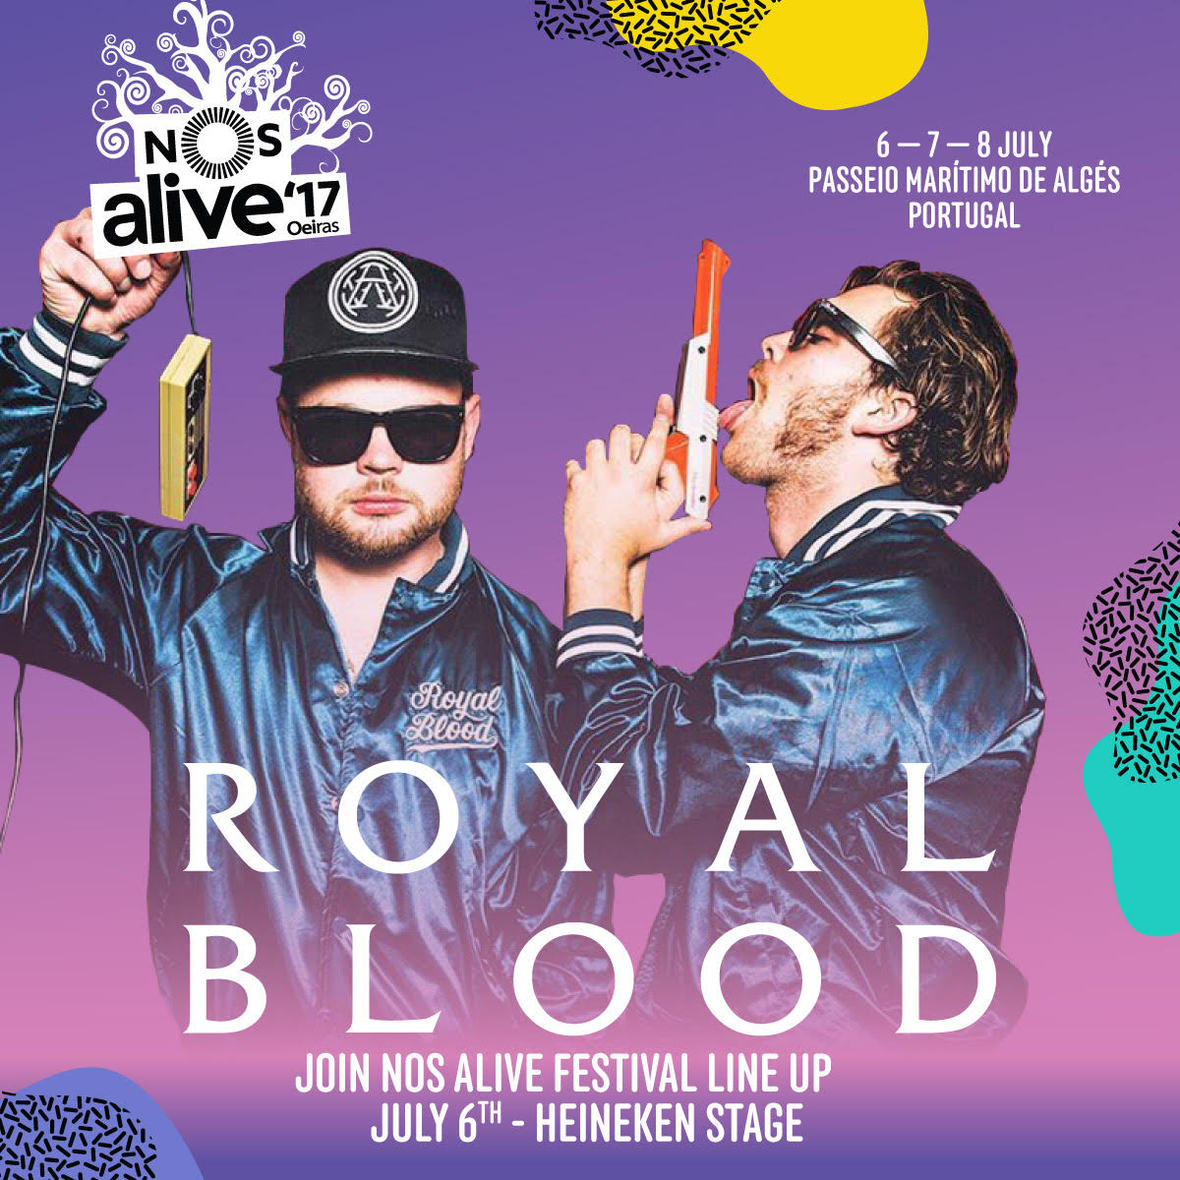 Royal Blood announced for NOS Alive 2017